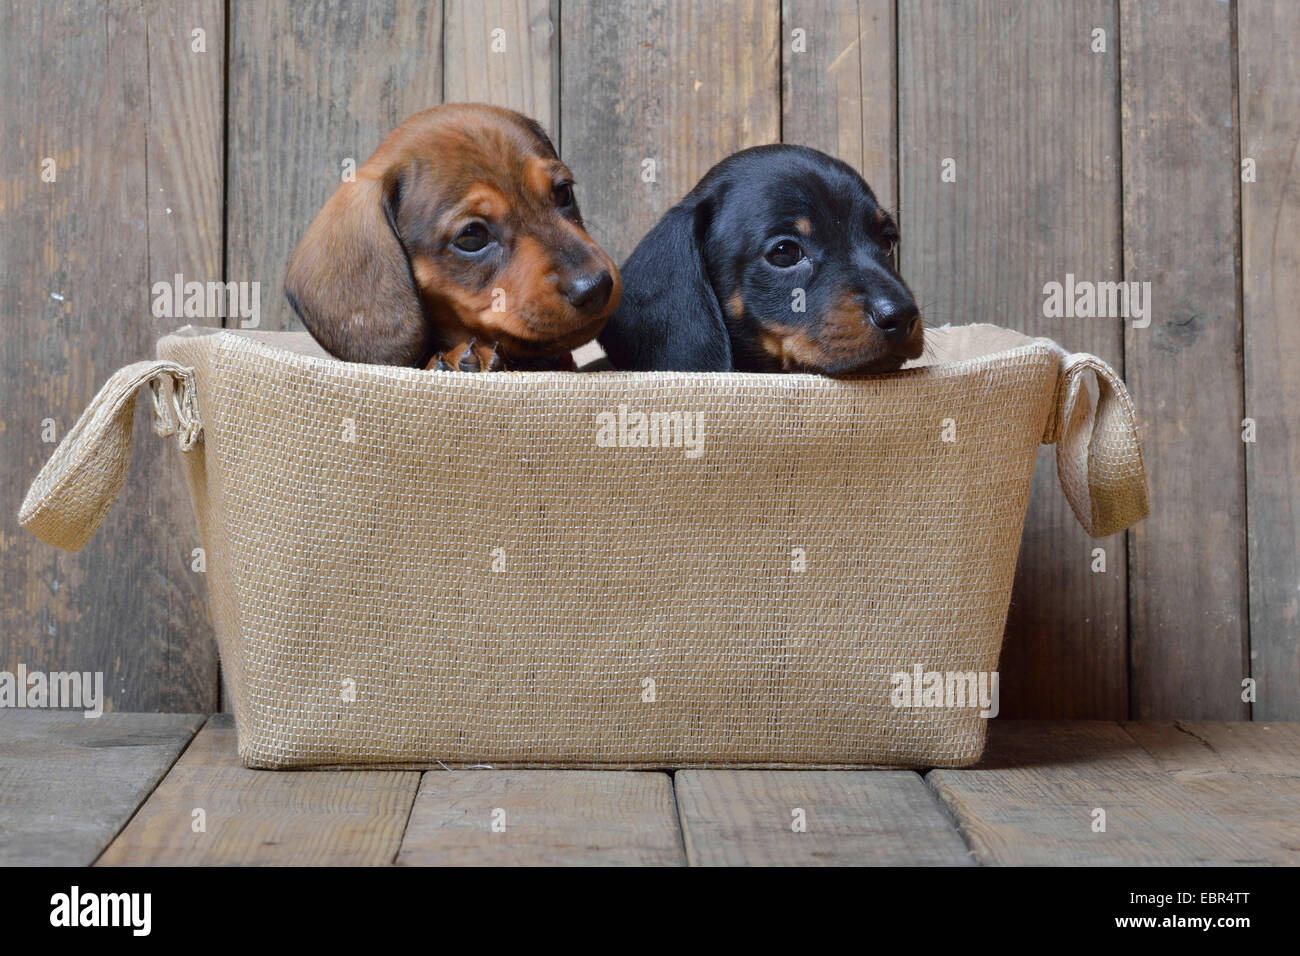 Short-haired Dachshund, Short-haired sausage dog, domestic dog (Canis lupus f. familiaris), two dachshund puppies looking out of a basket, Germany Stock Photo